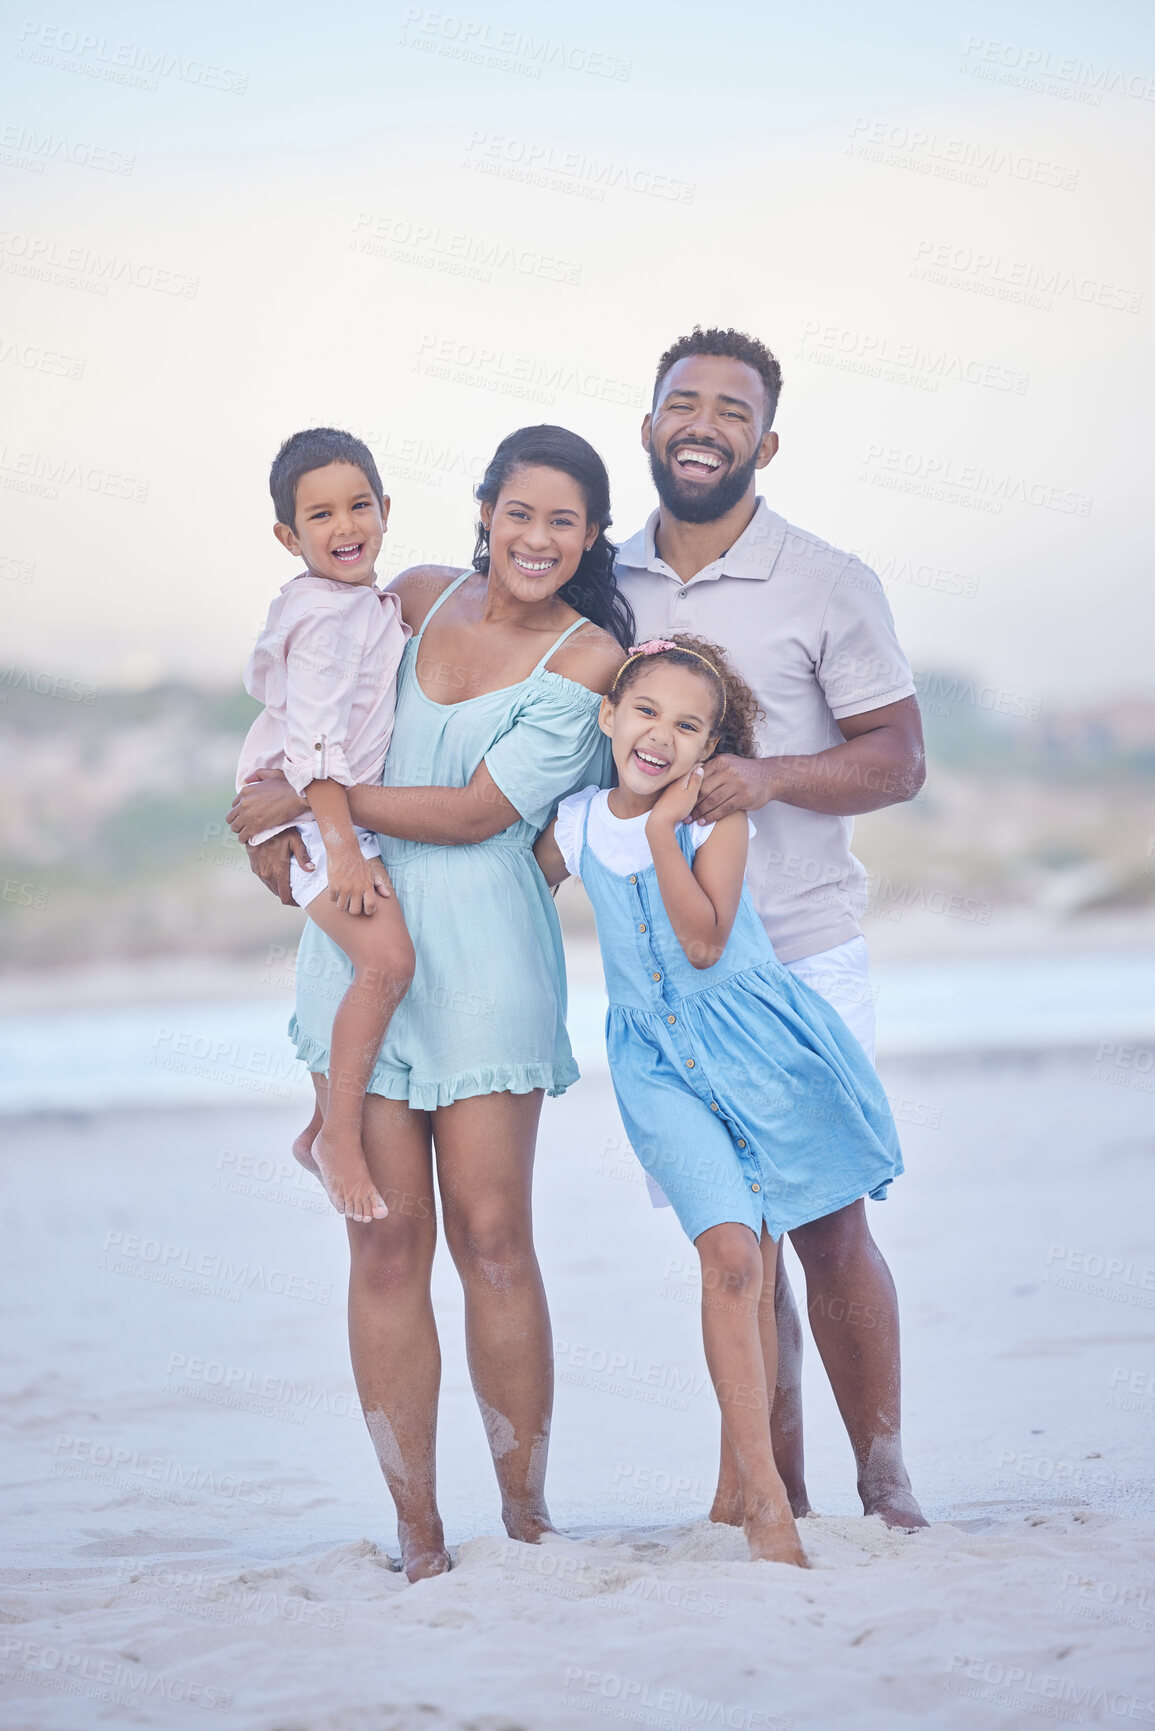 Buy stock photo Family, parents or portrait of happy kids at sea to travel with joy, smile or love on holiday vacation. Mom, beach or father smiling with children in Mexico with happiness bonding or walking together